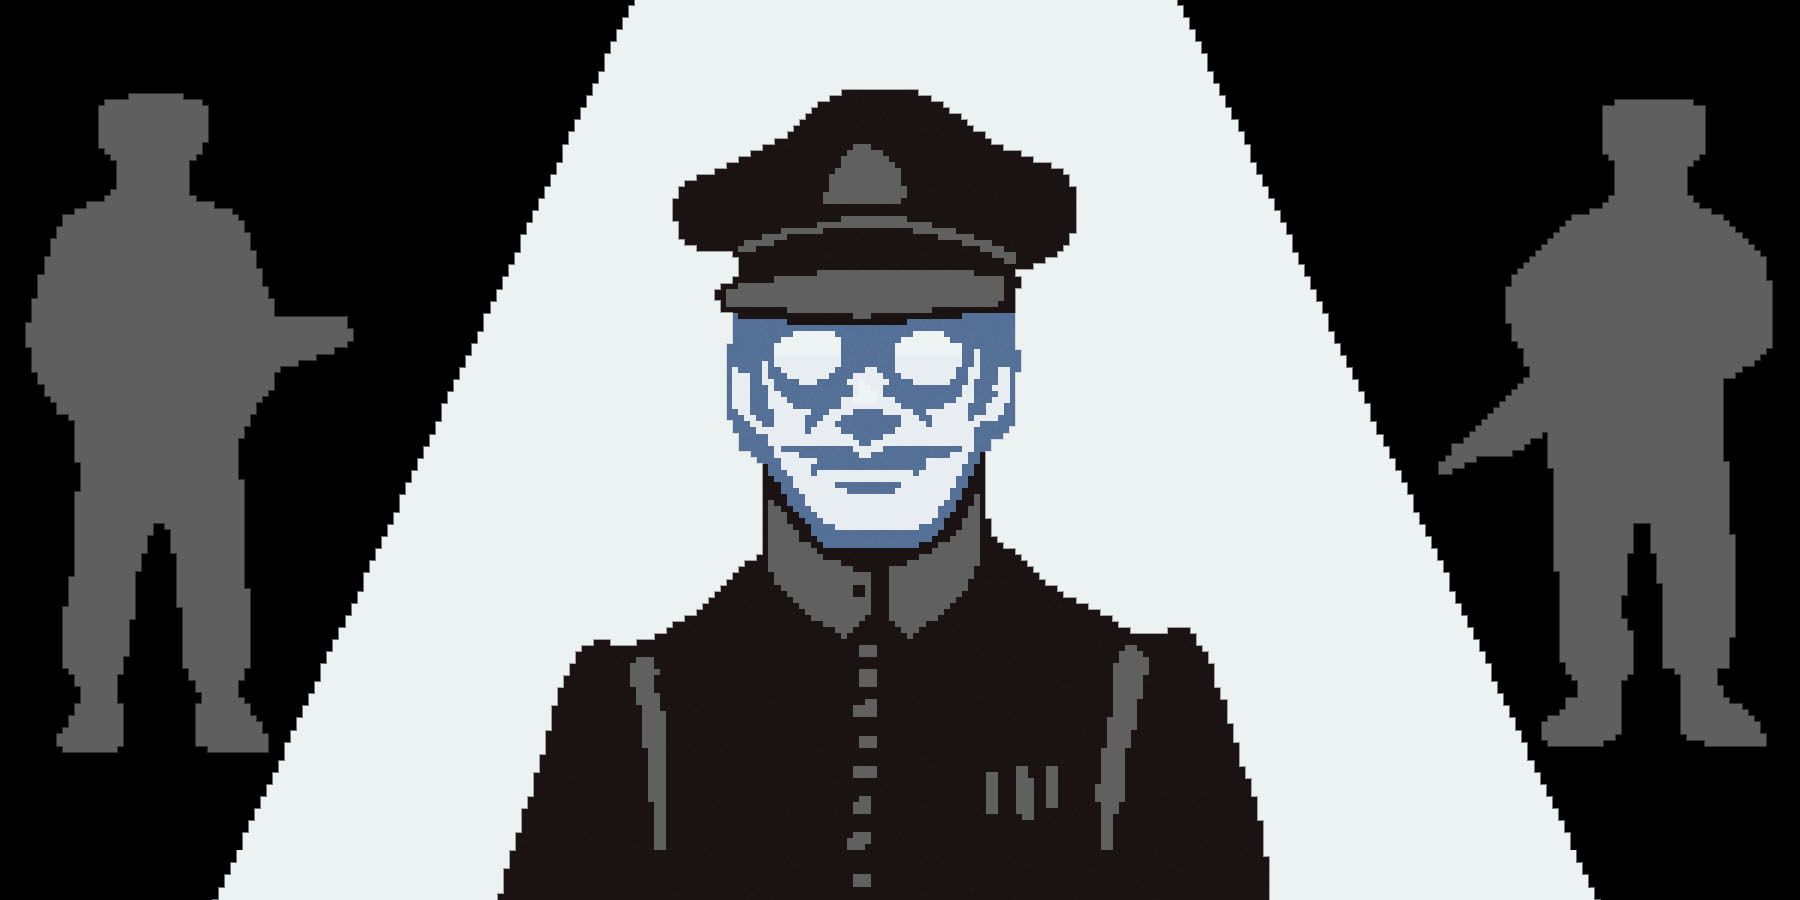 Papers, Please: All Endings Guide 2021 - KosGames